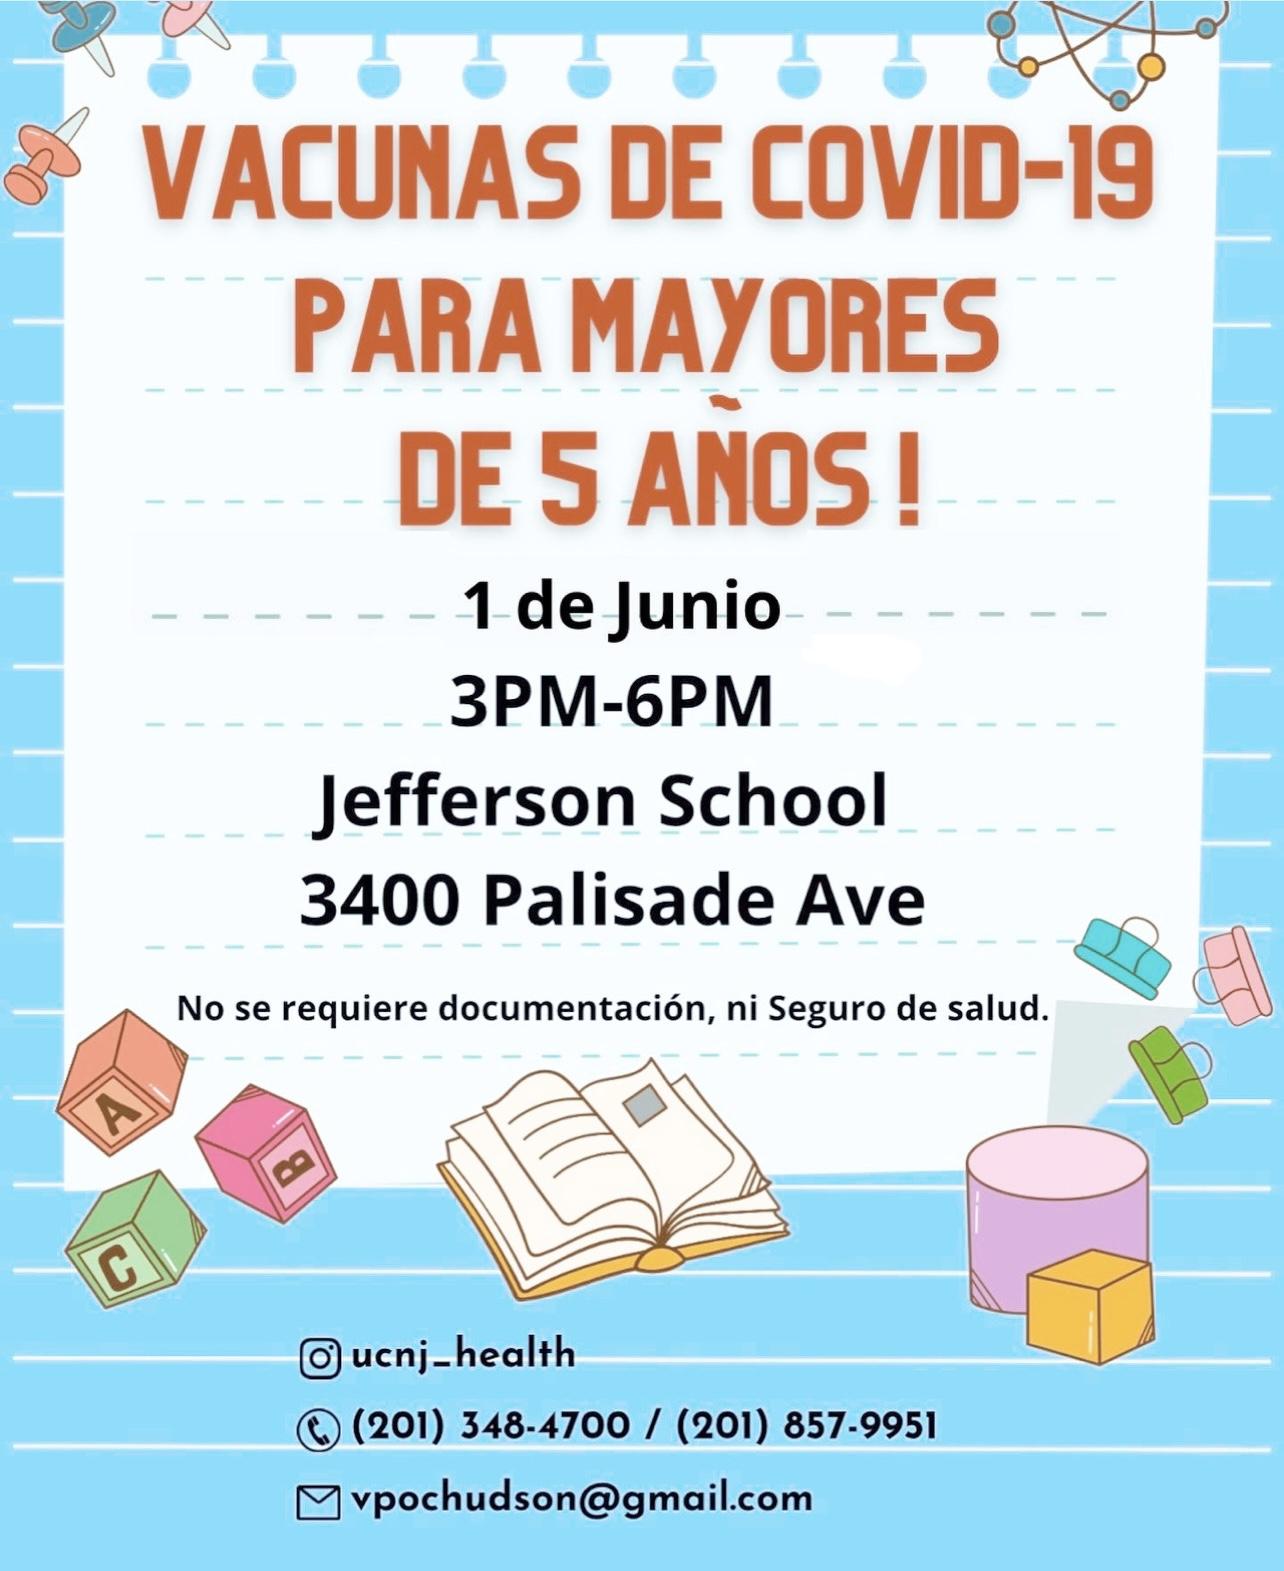 COVID-19 Vaccines For Ages 5 & Up Are Now Available-Spanish Flyer